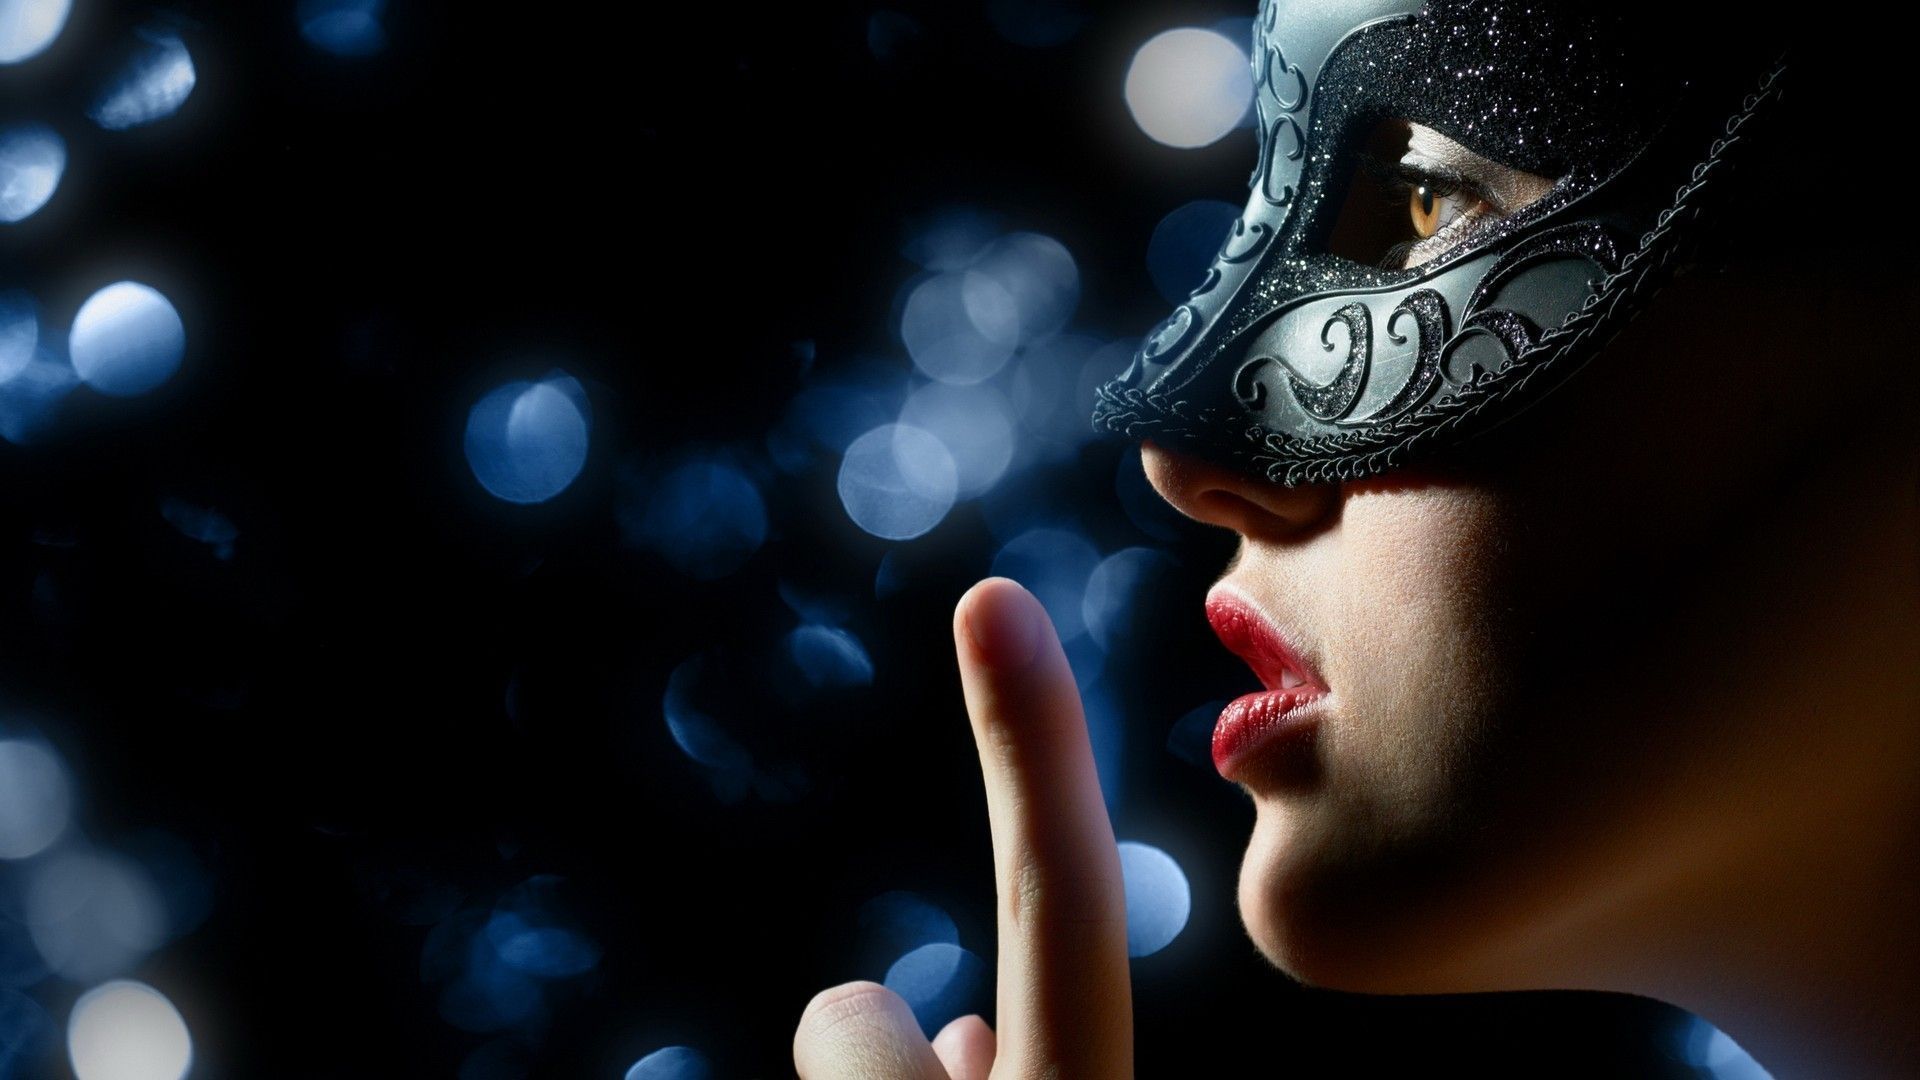 New Masquerade Mask High Defination Wallpapers - All HD Backgrounds